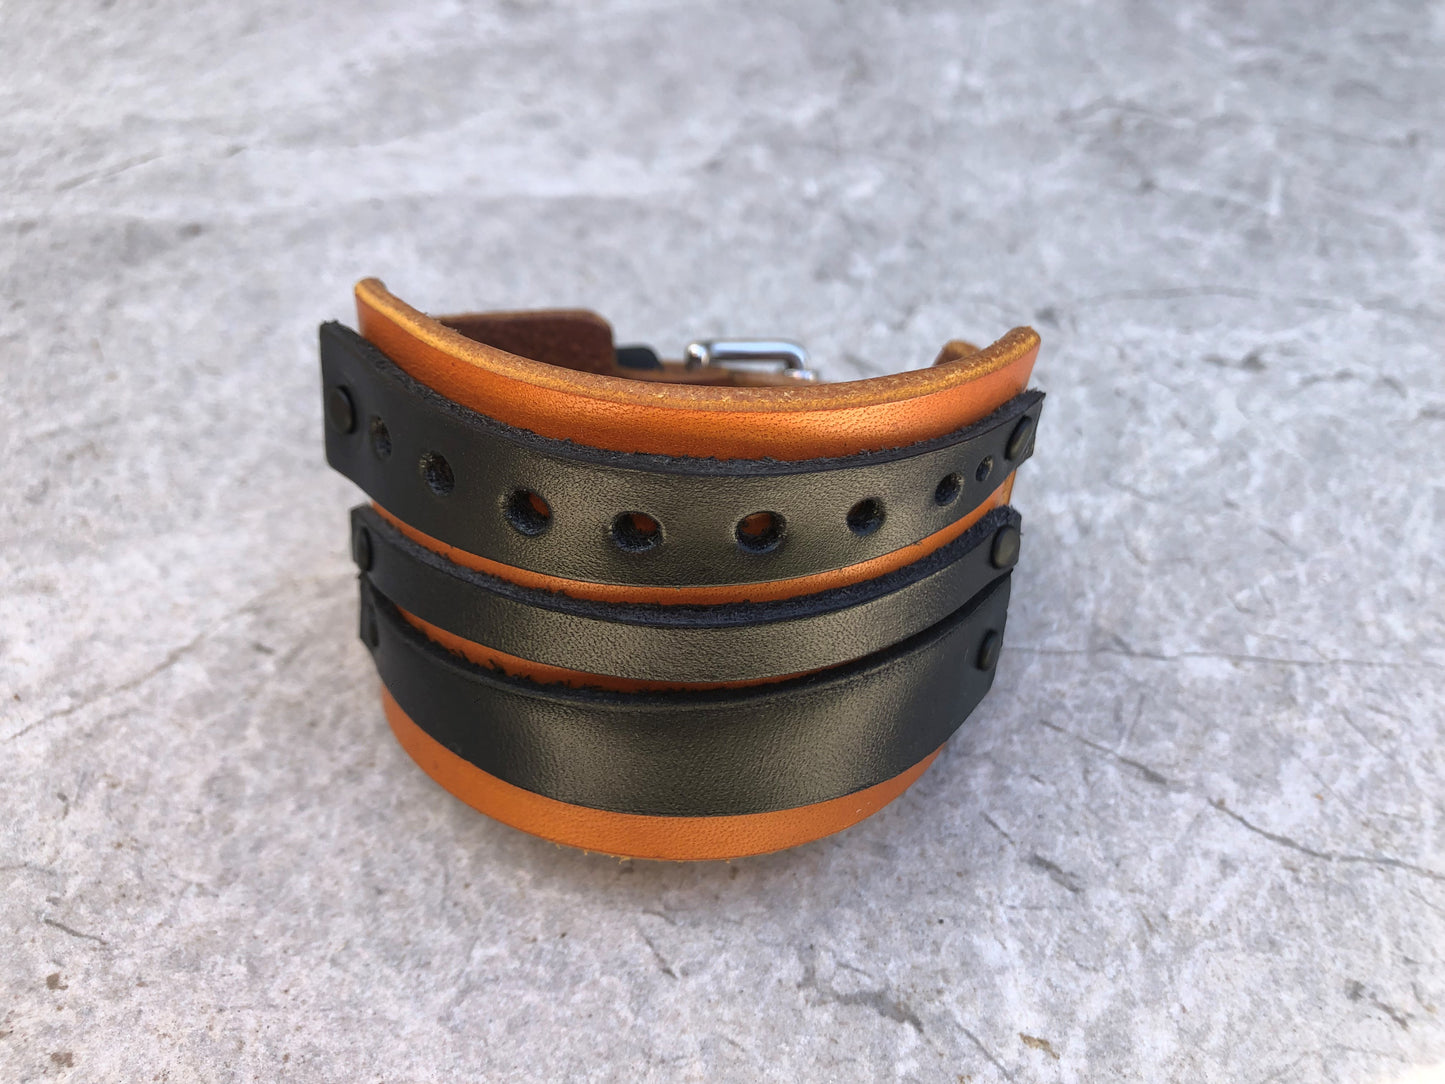 Tiger Cuff / Leather Bracelet with Adjustable Buckle